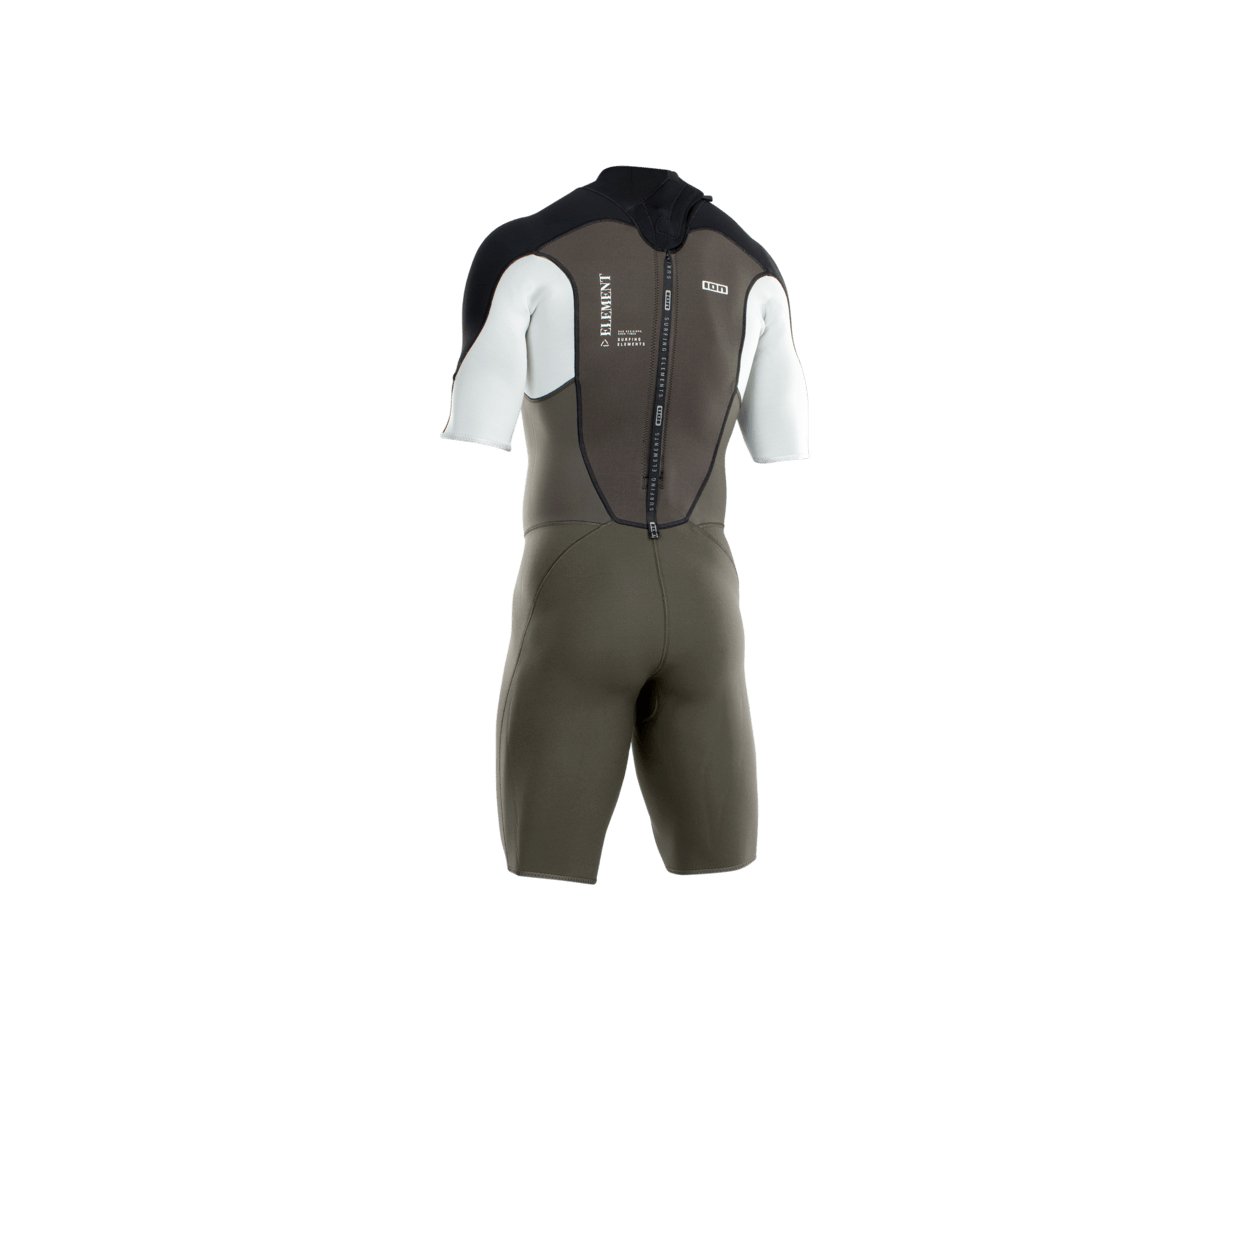 ION Men Wetsuit Element 2/2 Shorty Shortsleeve Back Zip 2022 - Worthing Watersports - 9008415951697 - Wetsuits - ION Water